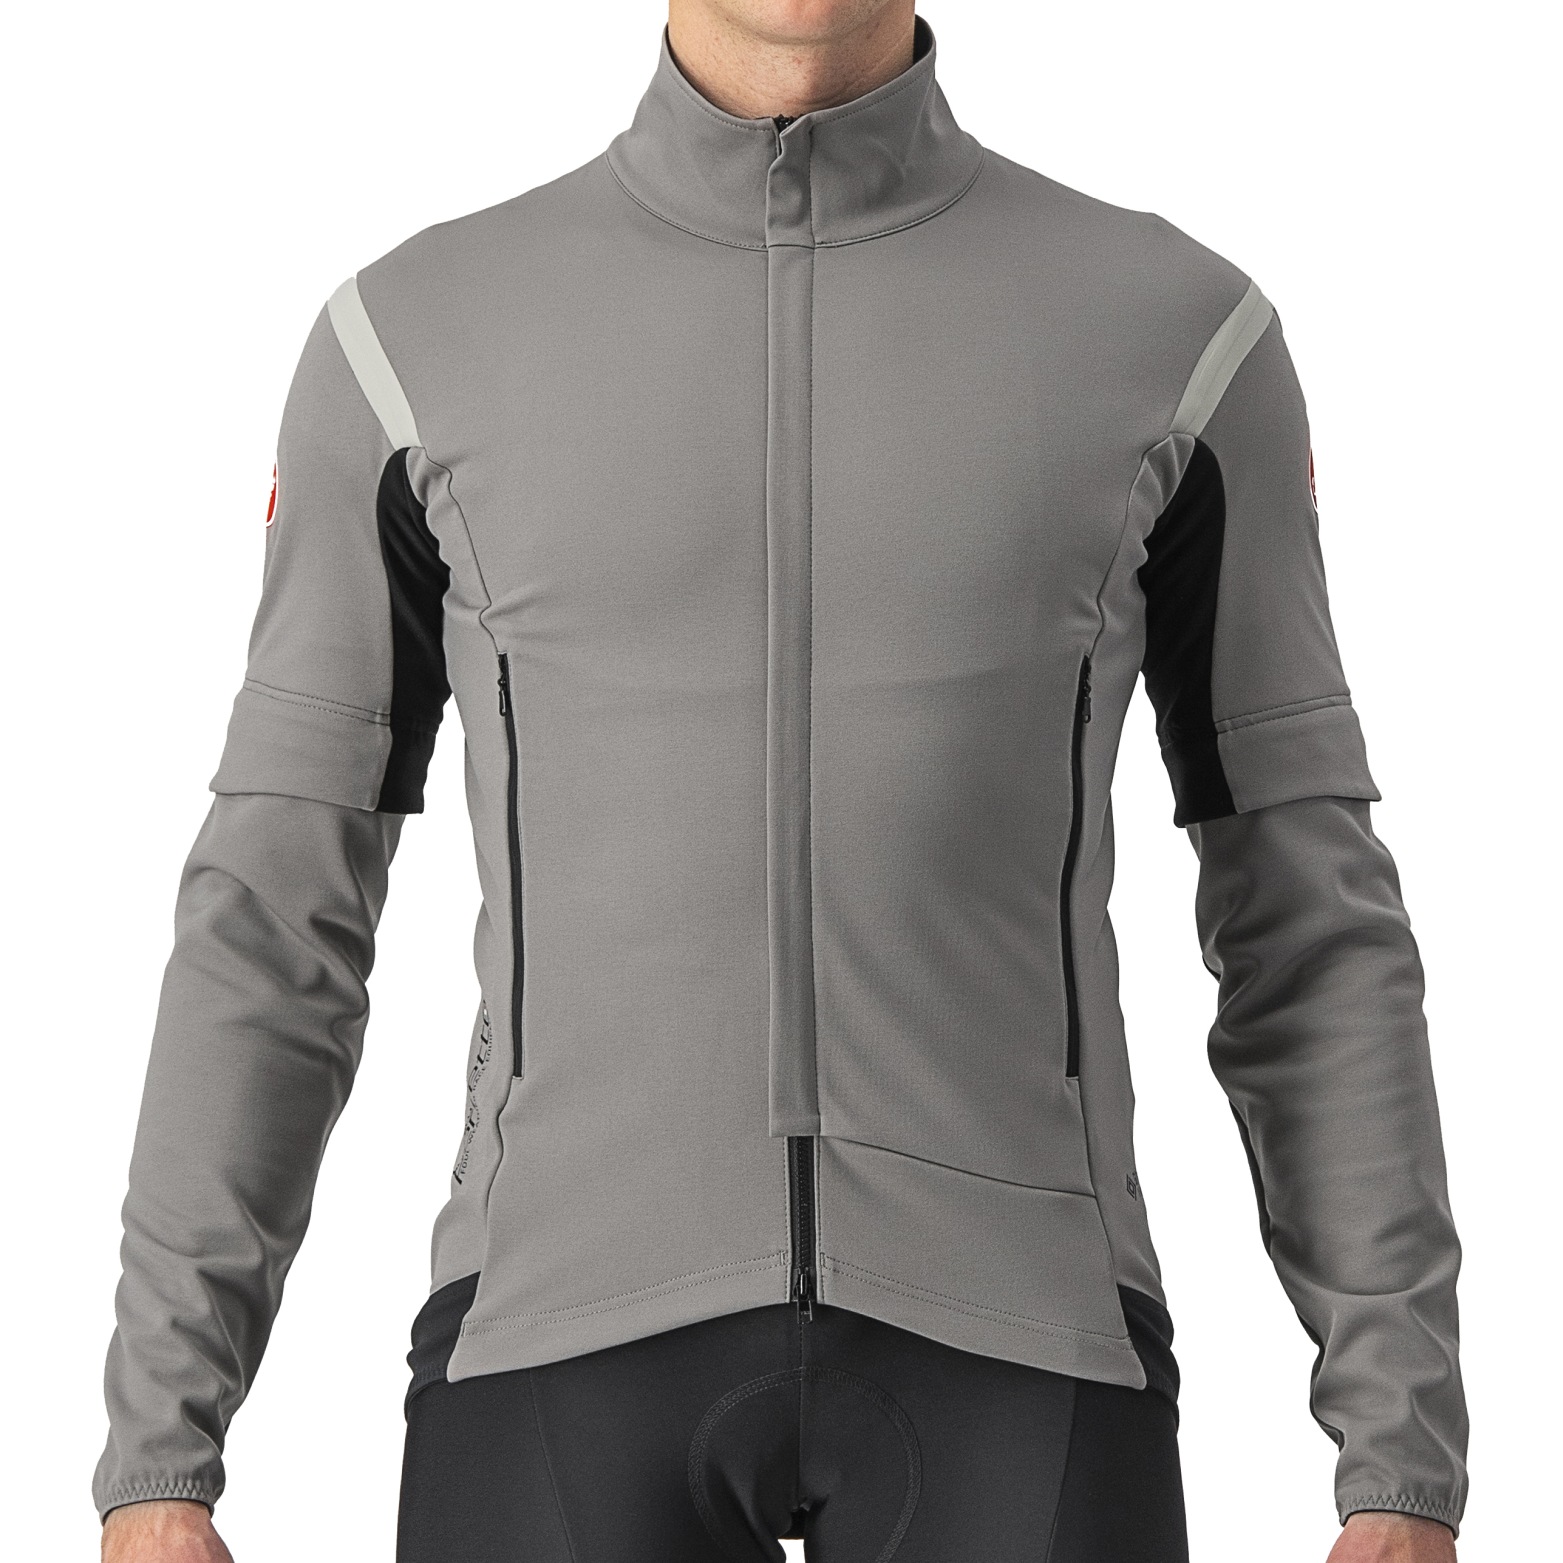 Picture of Castelli Perfetto RoS 2 Convertible Jacket Men - nickel grey/travertine grey 064